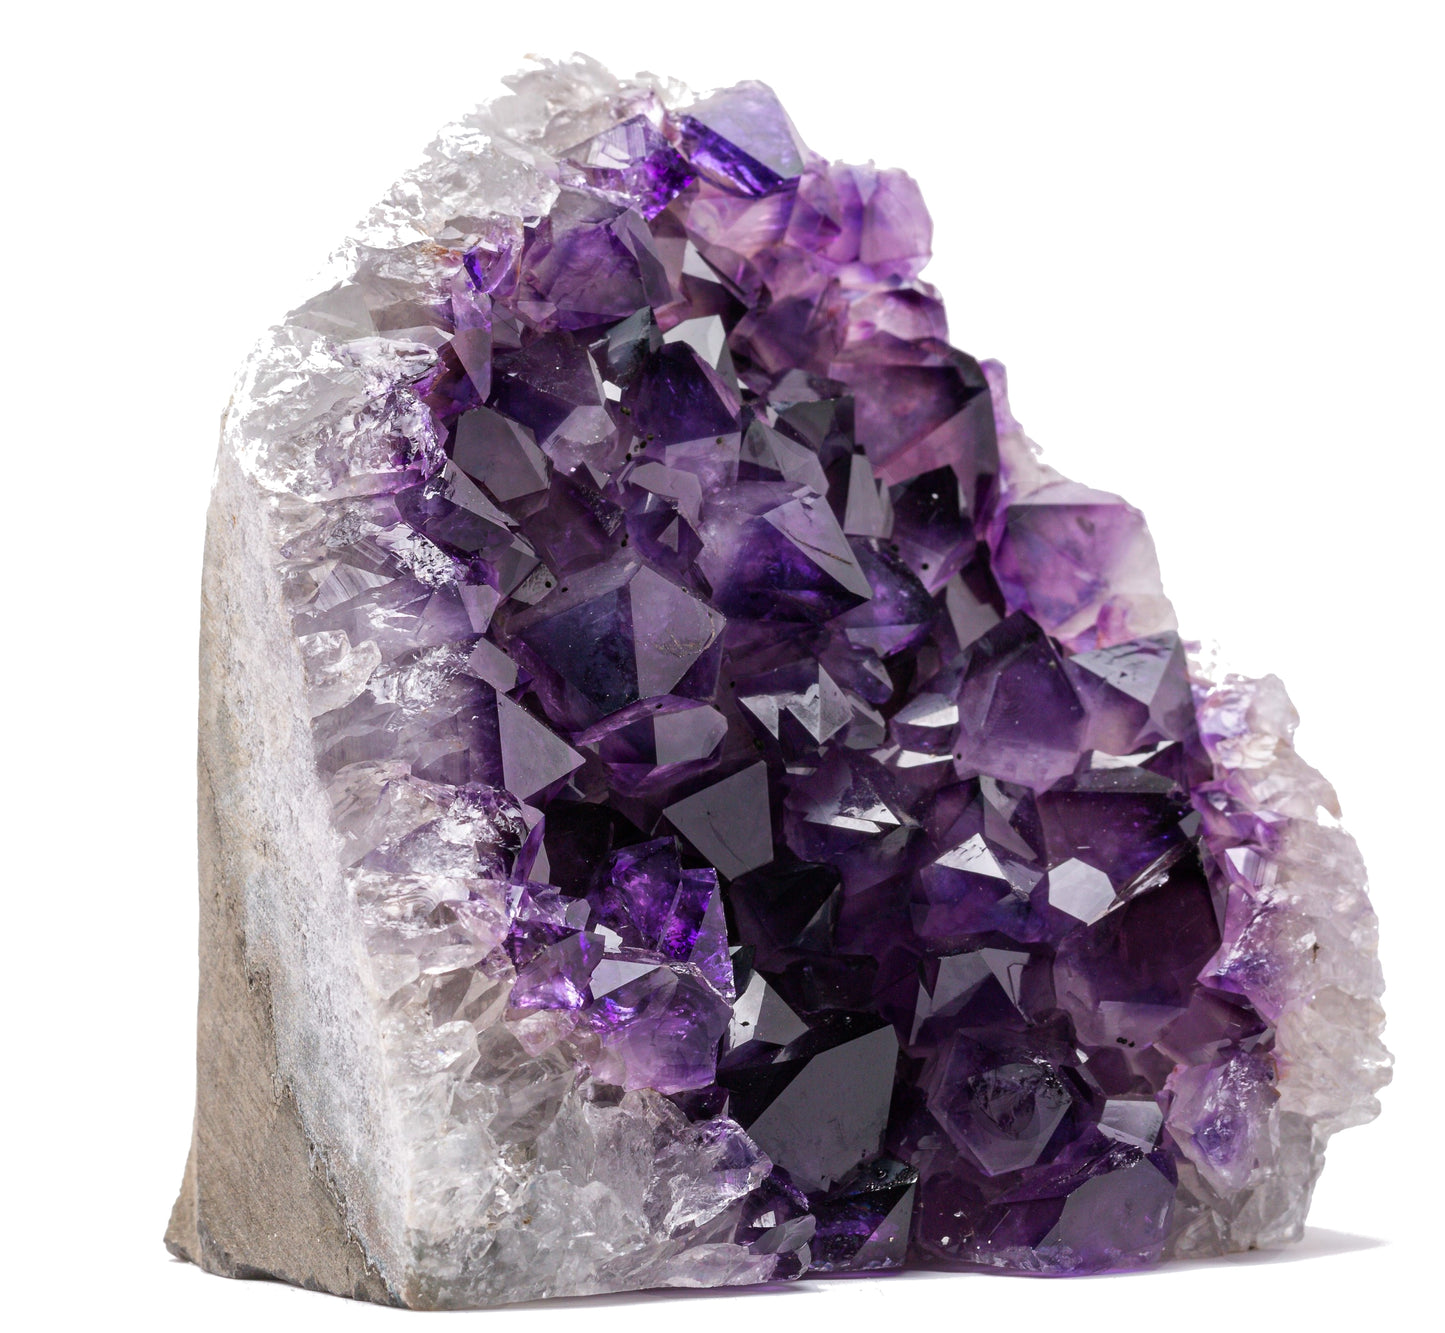 Deep Purple Natural Amethyst Crystal Clusters (0.5 lb to 1 lb) from Uruguay Raw Geode Quartz